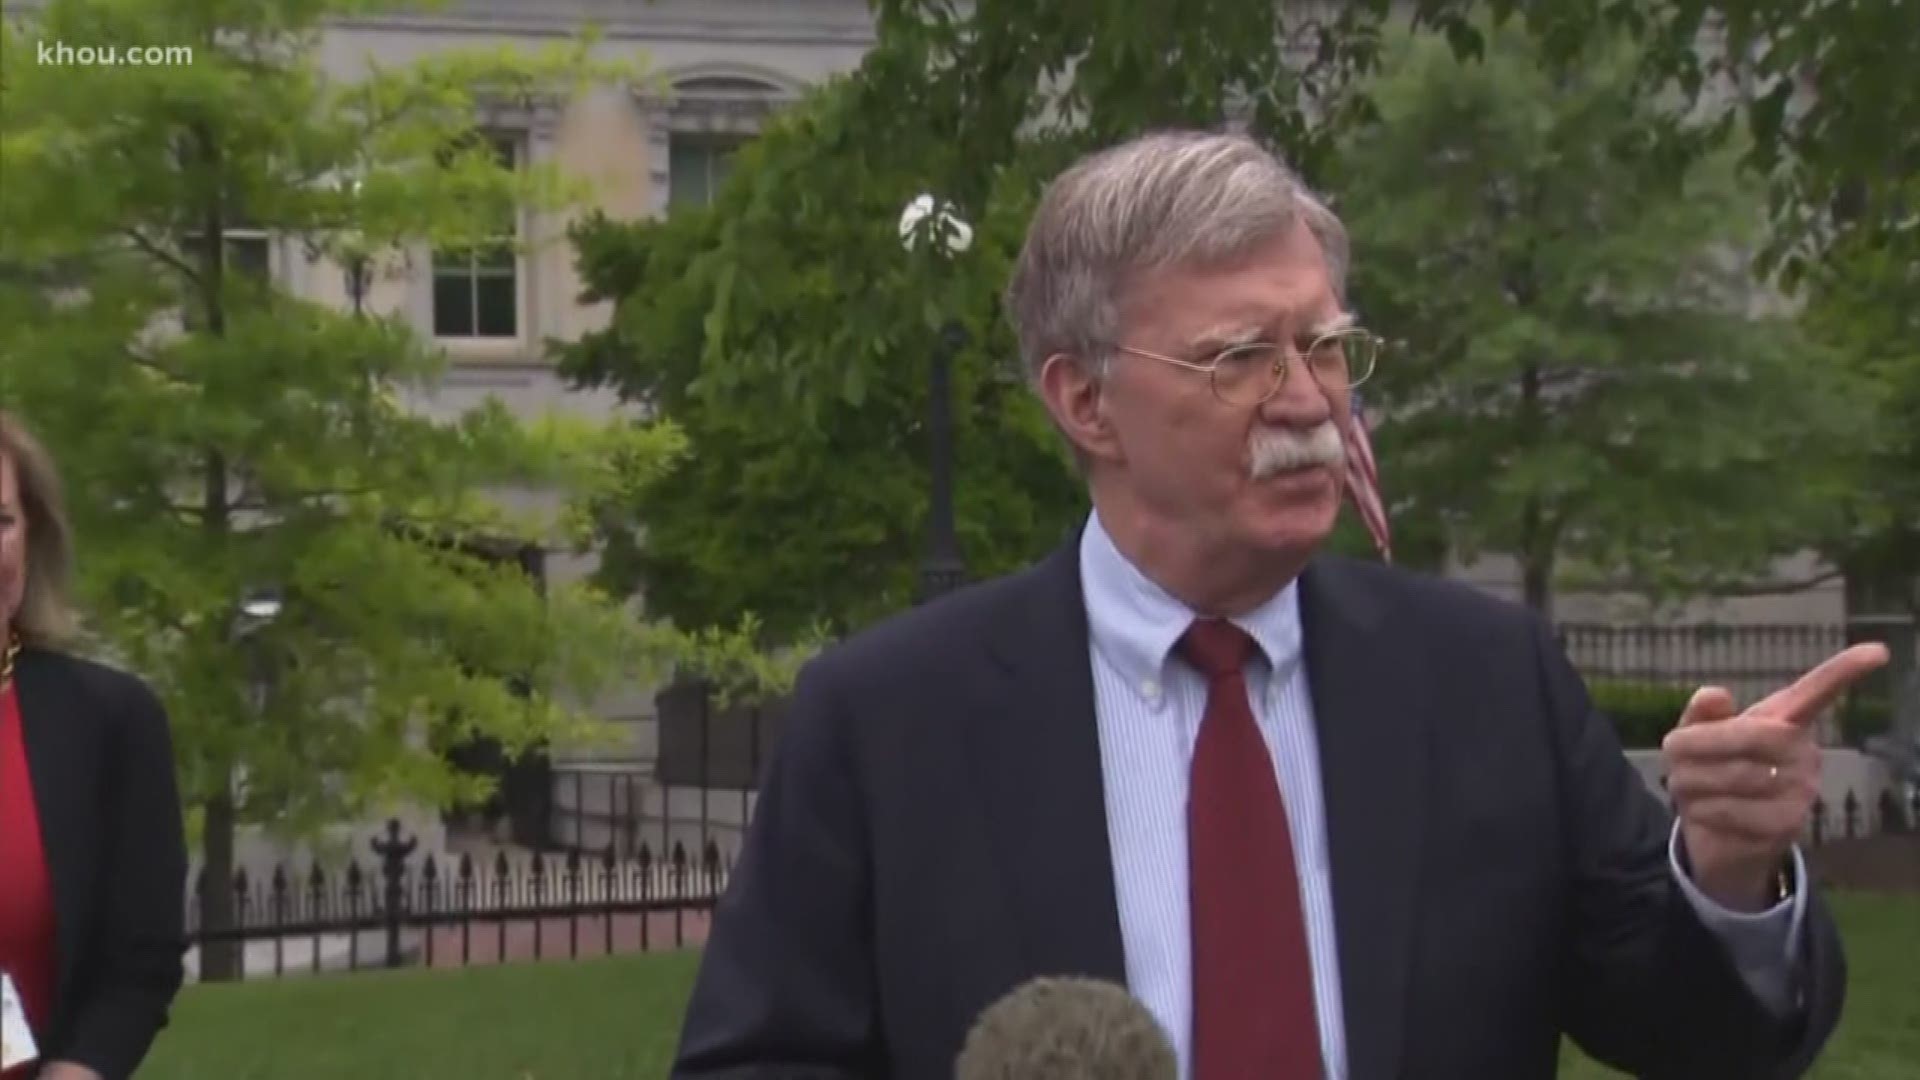 Even as Trump's defense lawyers laid out their case, it was clear that Bolton's book has scrambled the debate over whether to seek witnesses.